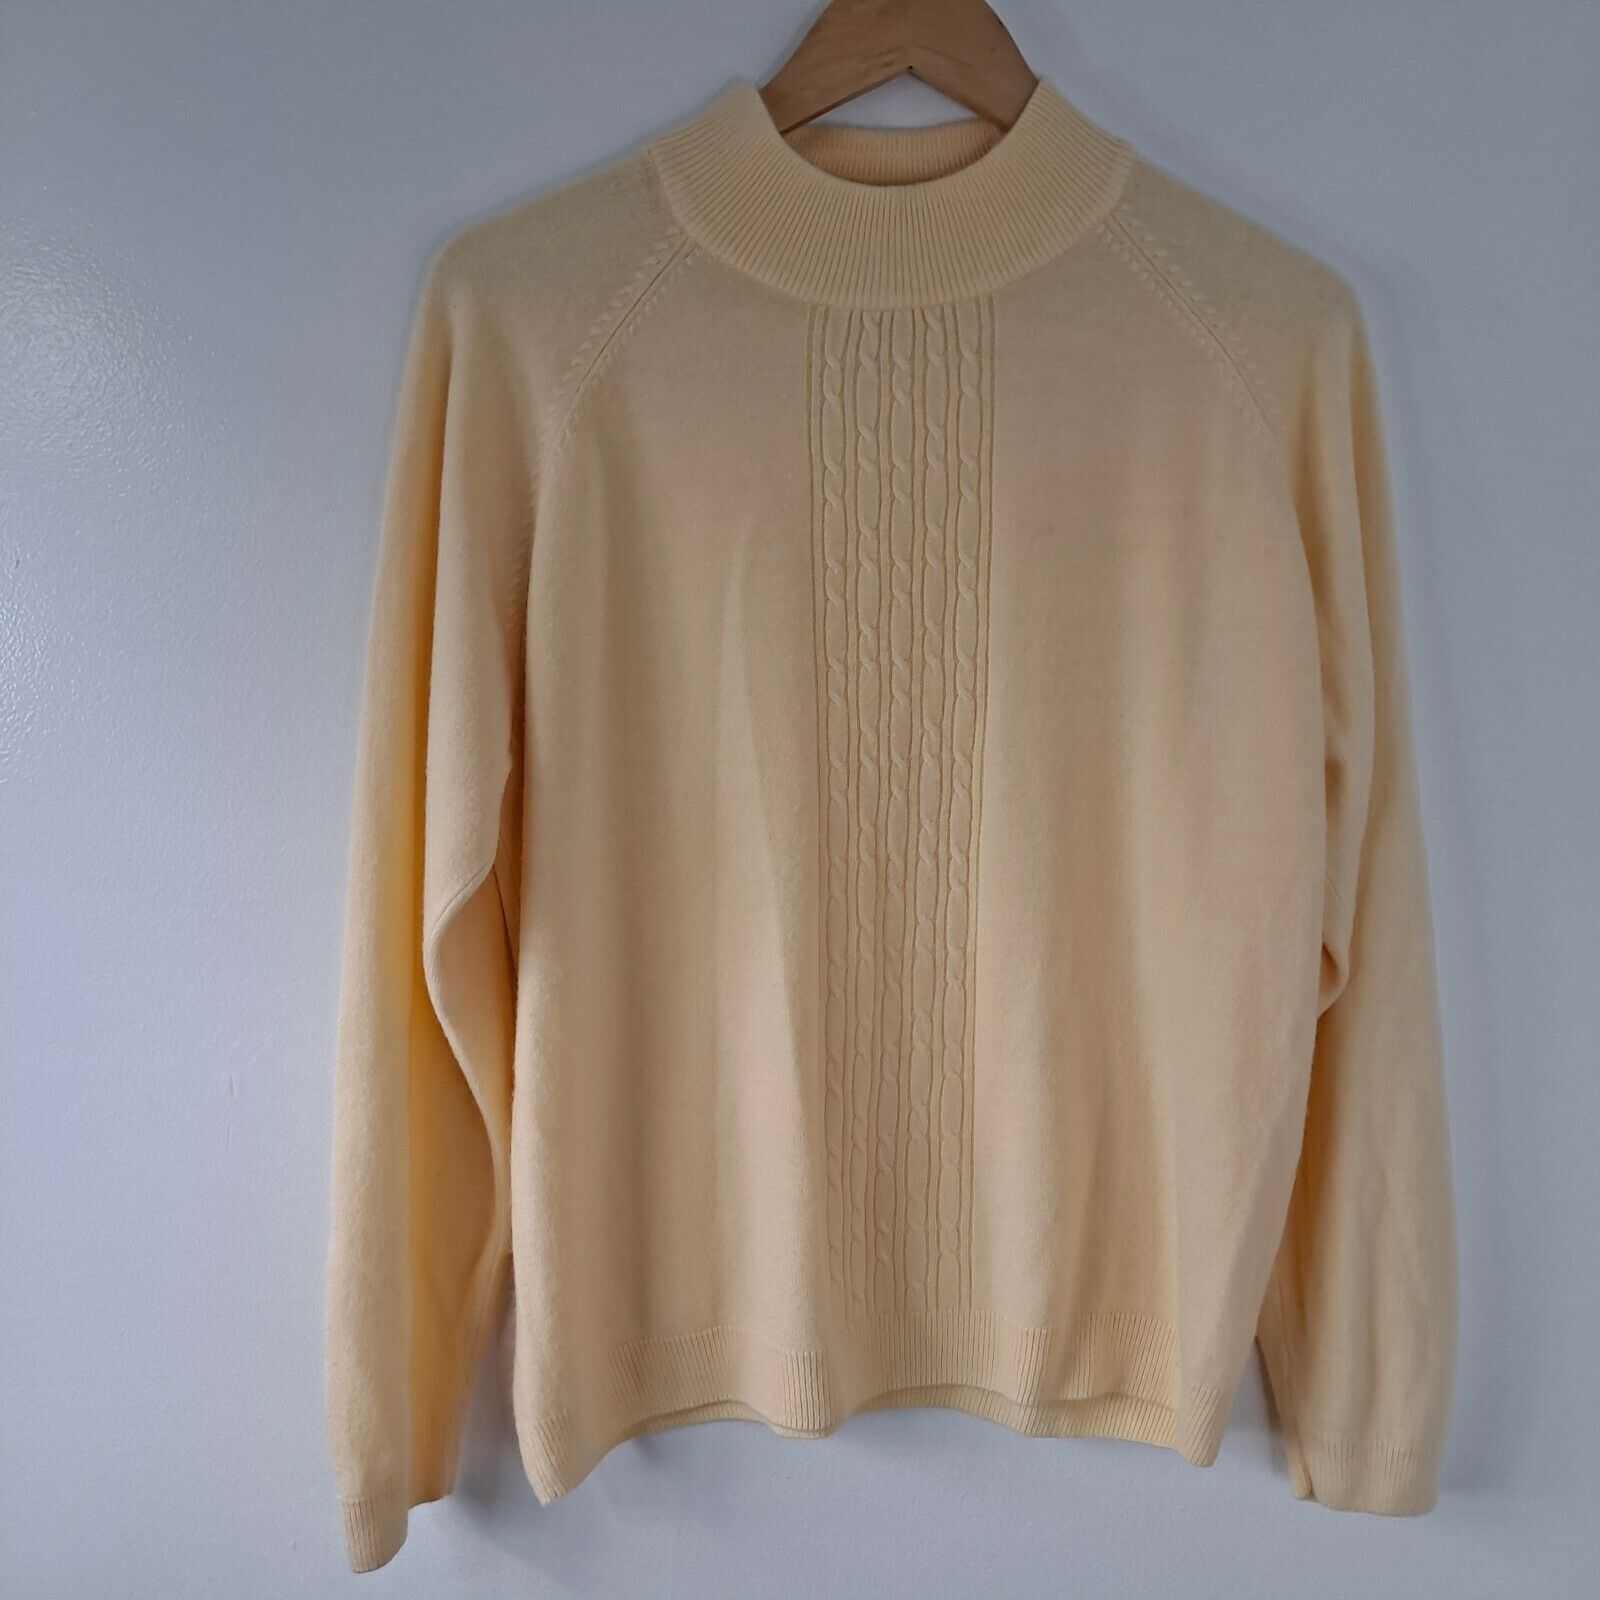 Primary image for Allison Daily Yellow Mock Neck Sweater Women's L